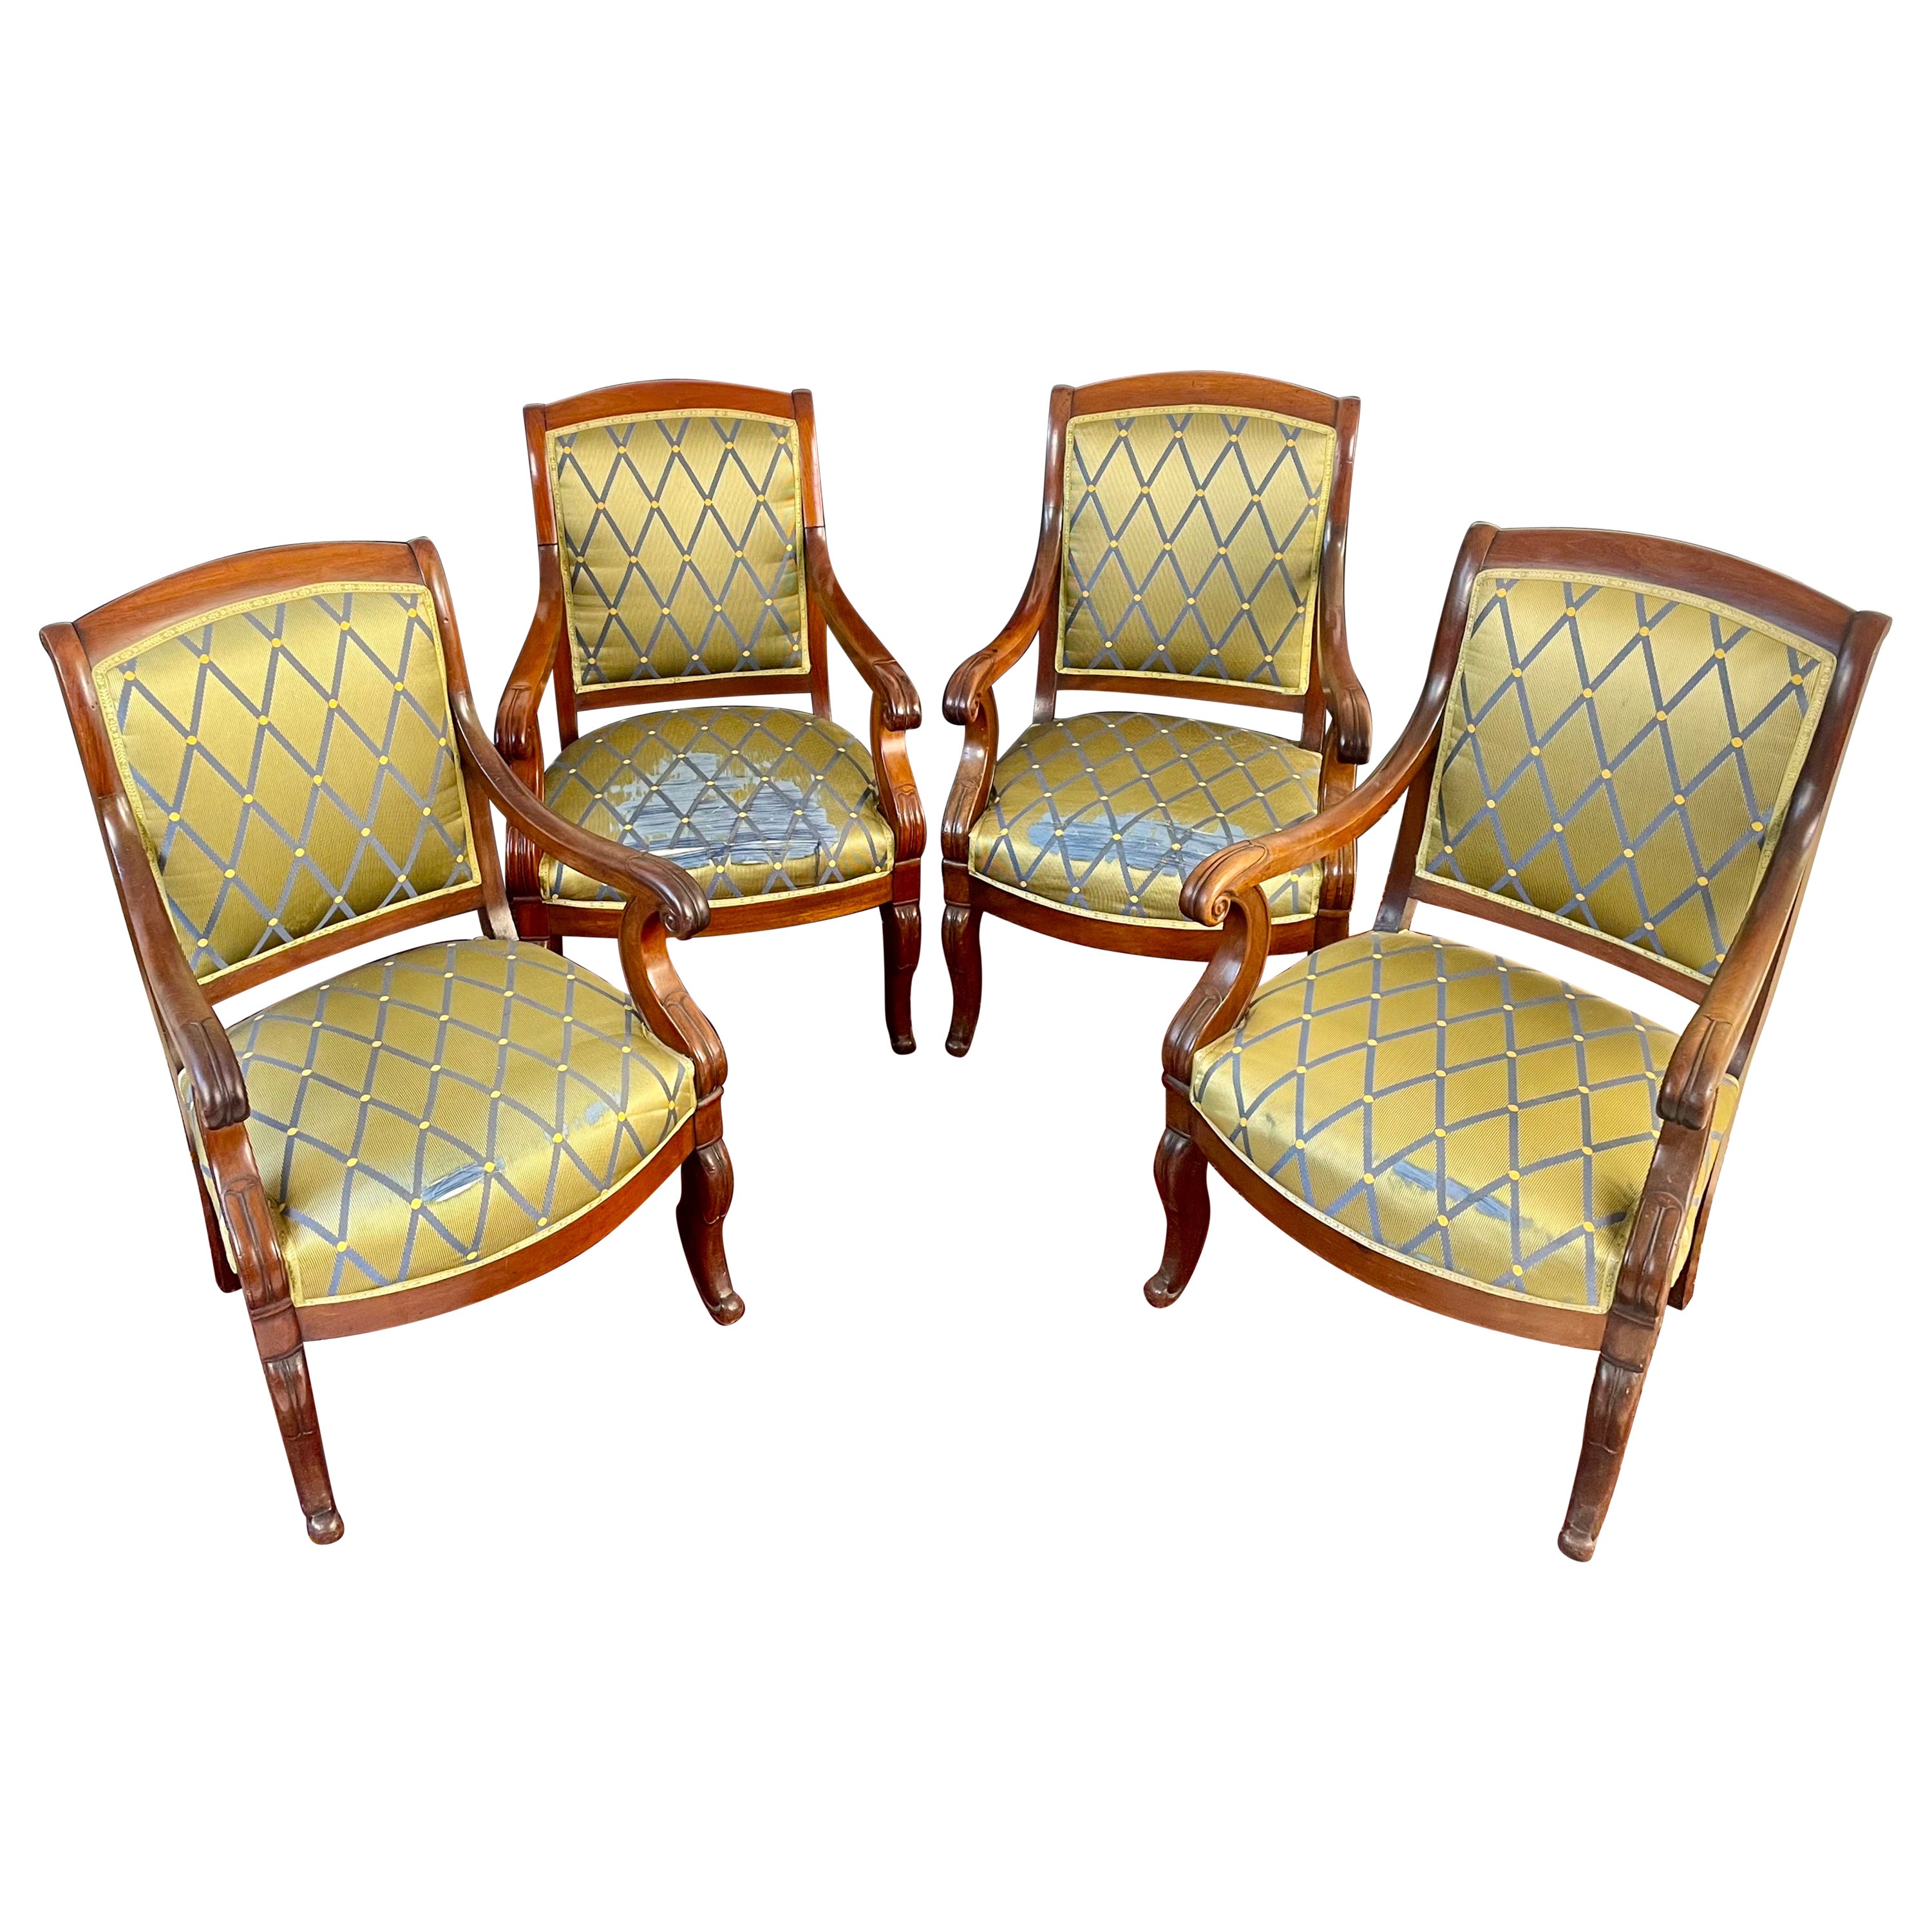 French Set of 4 Mahogany Armchairs, Restoration Period, 19th Century - France For Sale